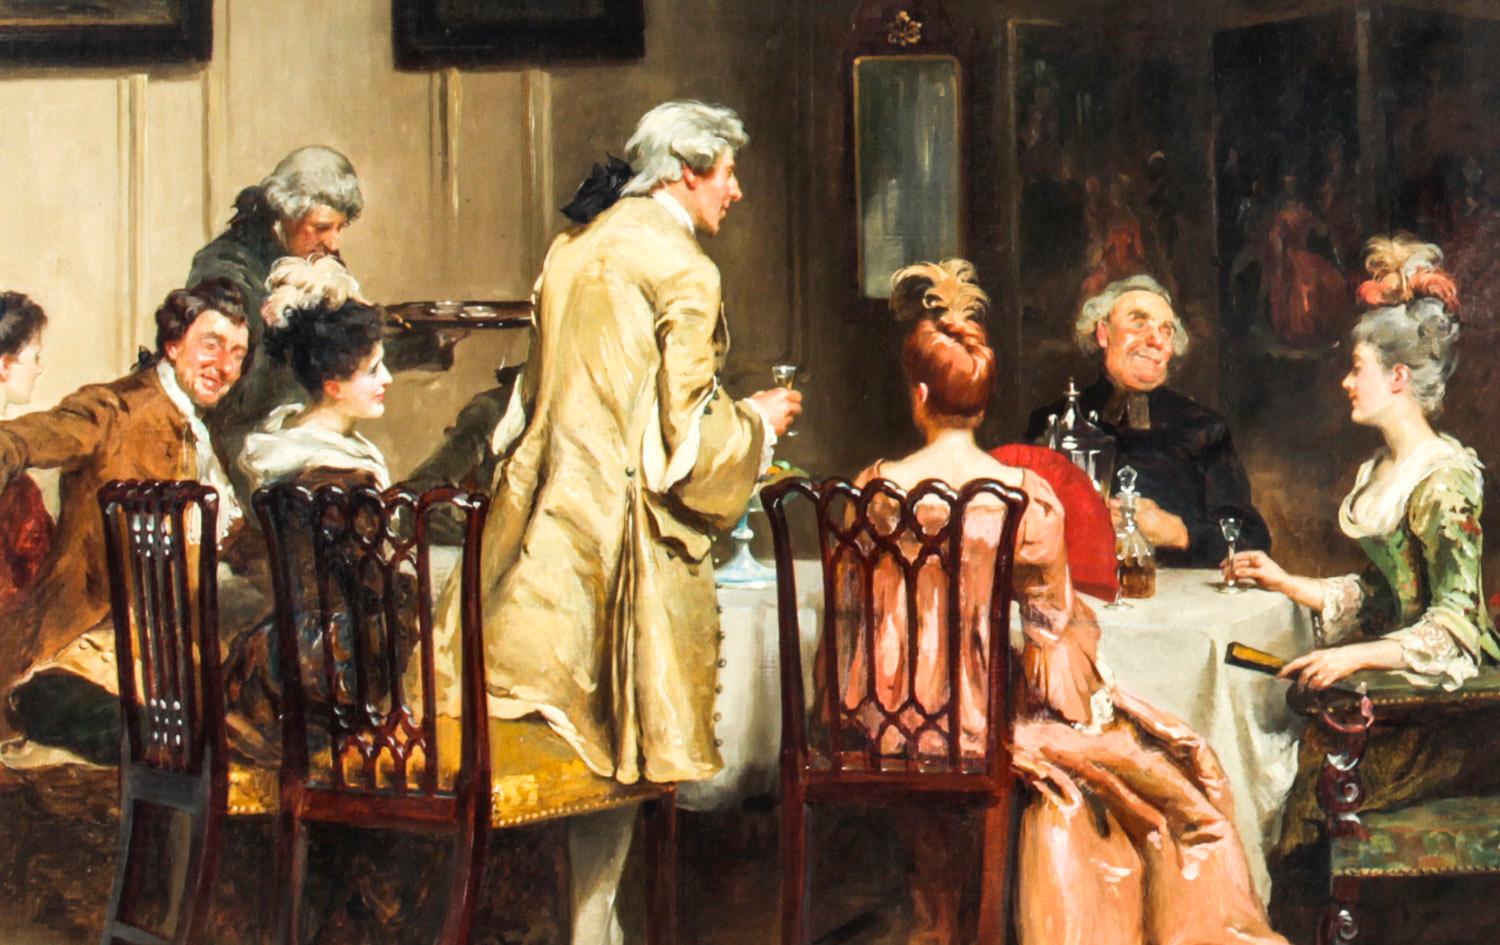 This is a truly splendid antique oil on canvas painting featuring a period interior scene by Fred Roe (1864-1947), signed and dated 1894.

This beautiful oil painting depicts a dinner party with the figures in a period costume seated while one